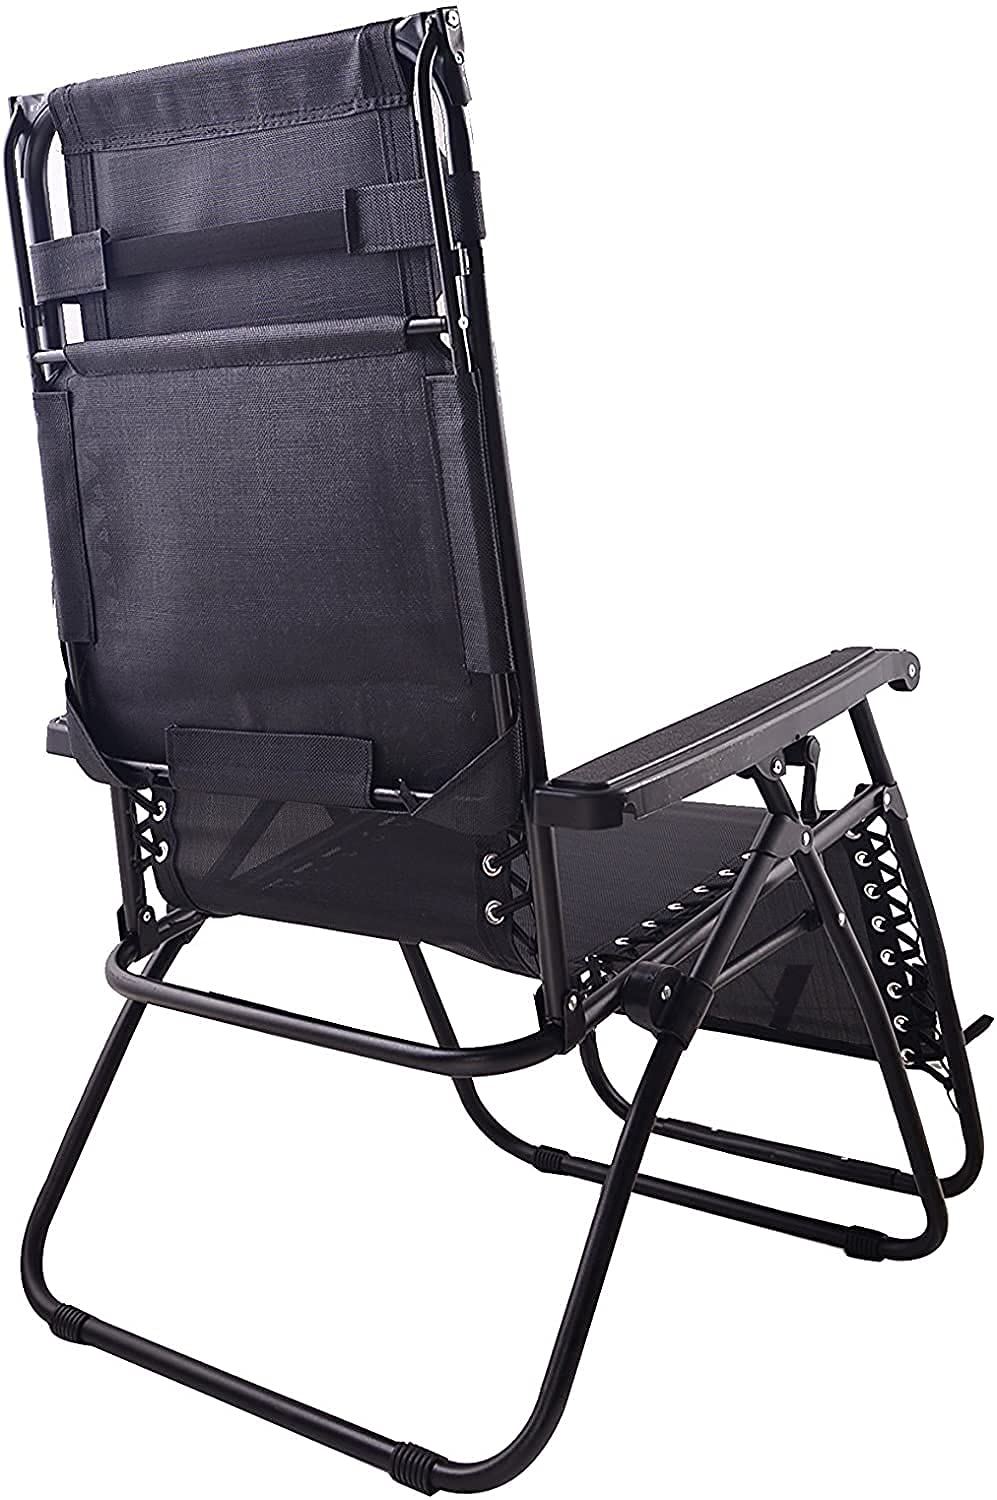 BTEXPERT CC5044B Zero Gravity Chair Case Lounge Outdoor Patio Beach Yard Garden with Utility Tray Cup Holder (One Piece, Black with Canopy) One Piece